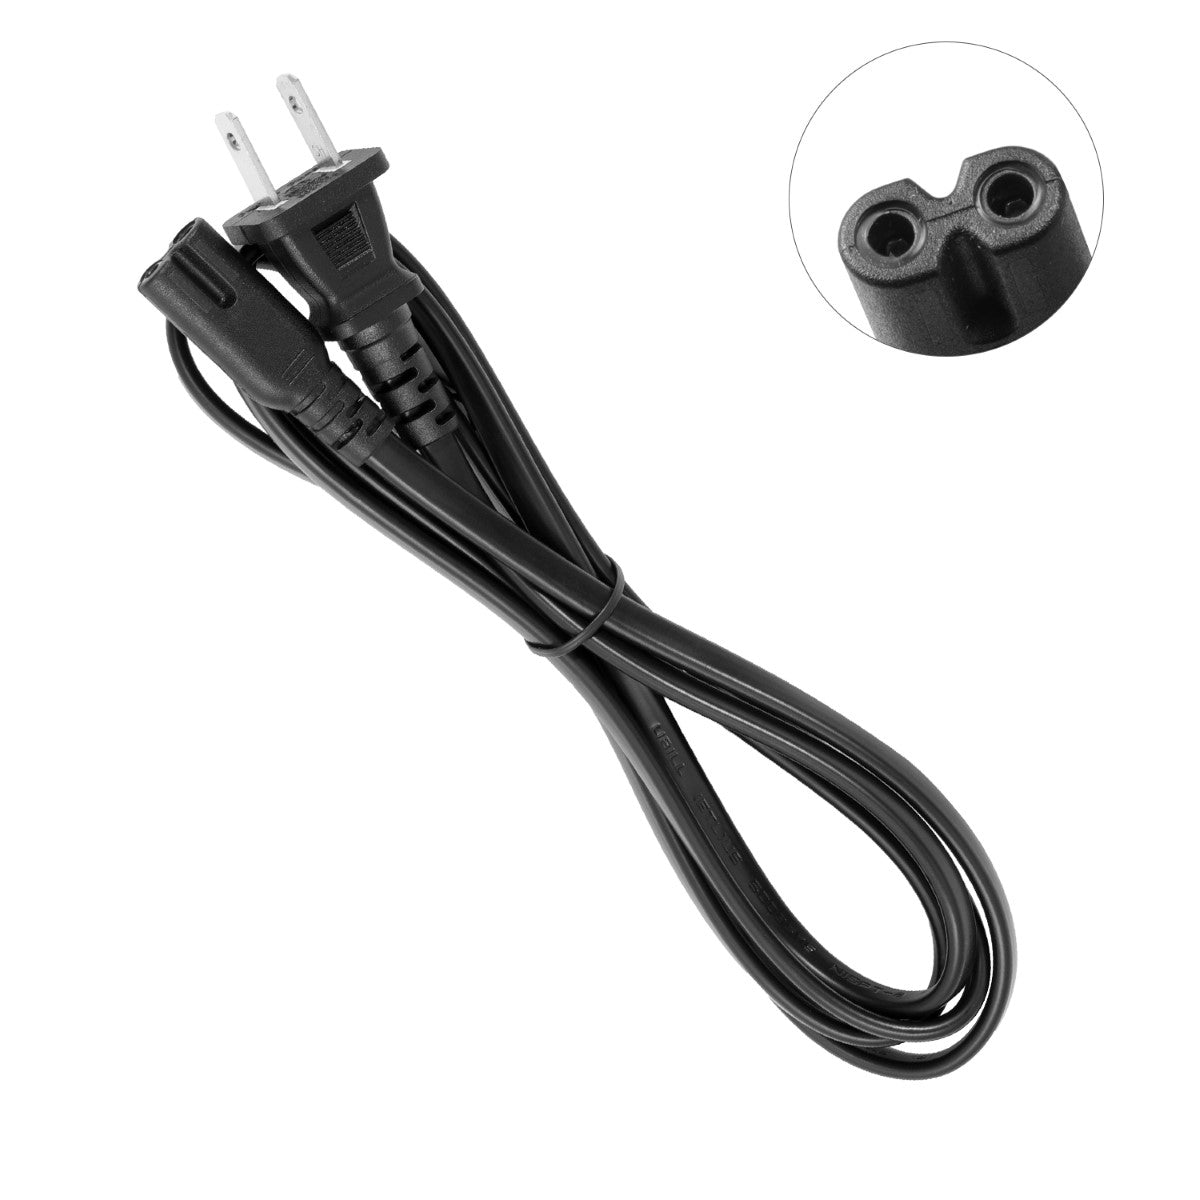 Power Cable for HP ENVY Photo 7164 Printer.